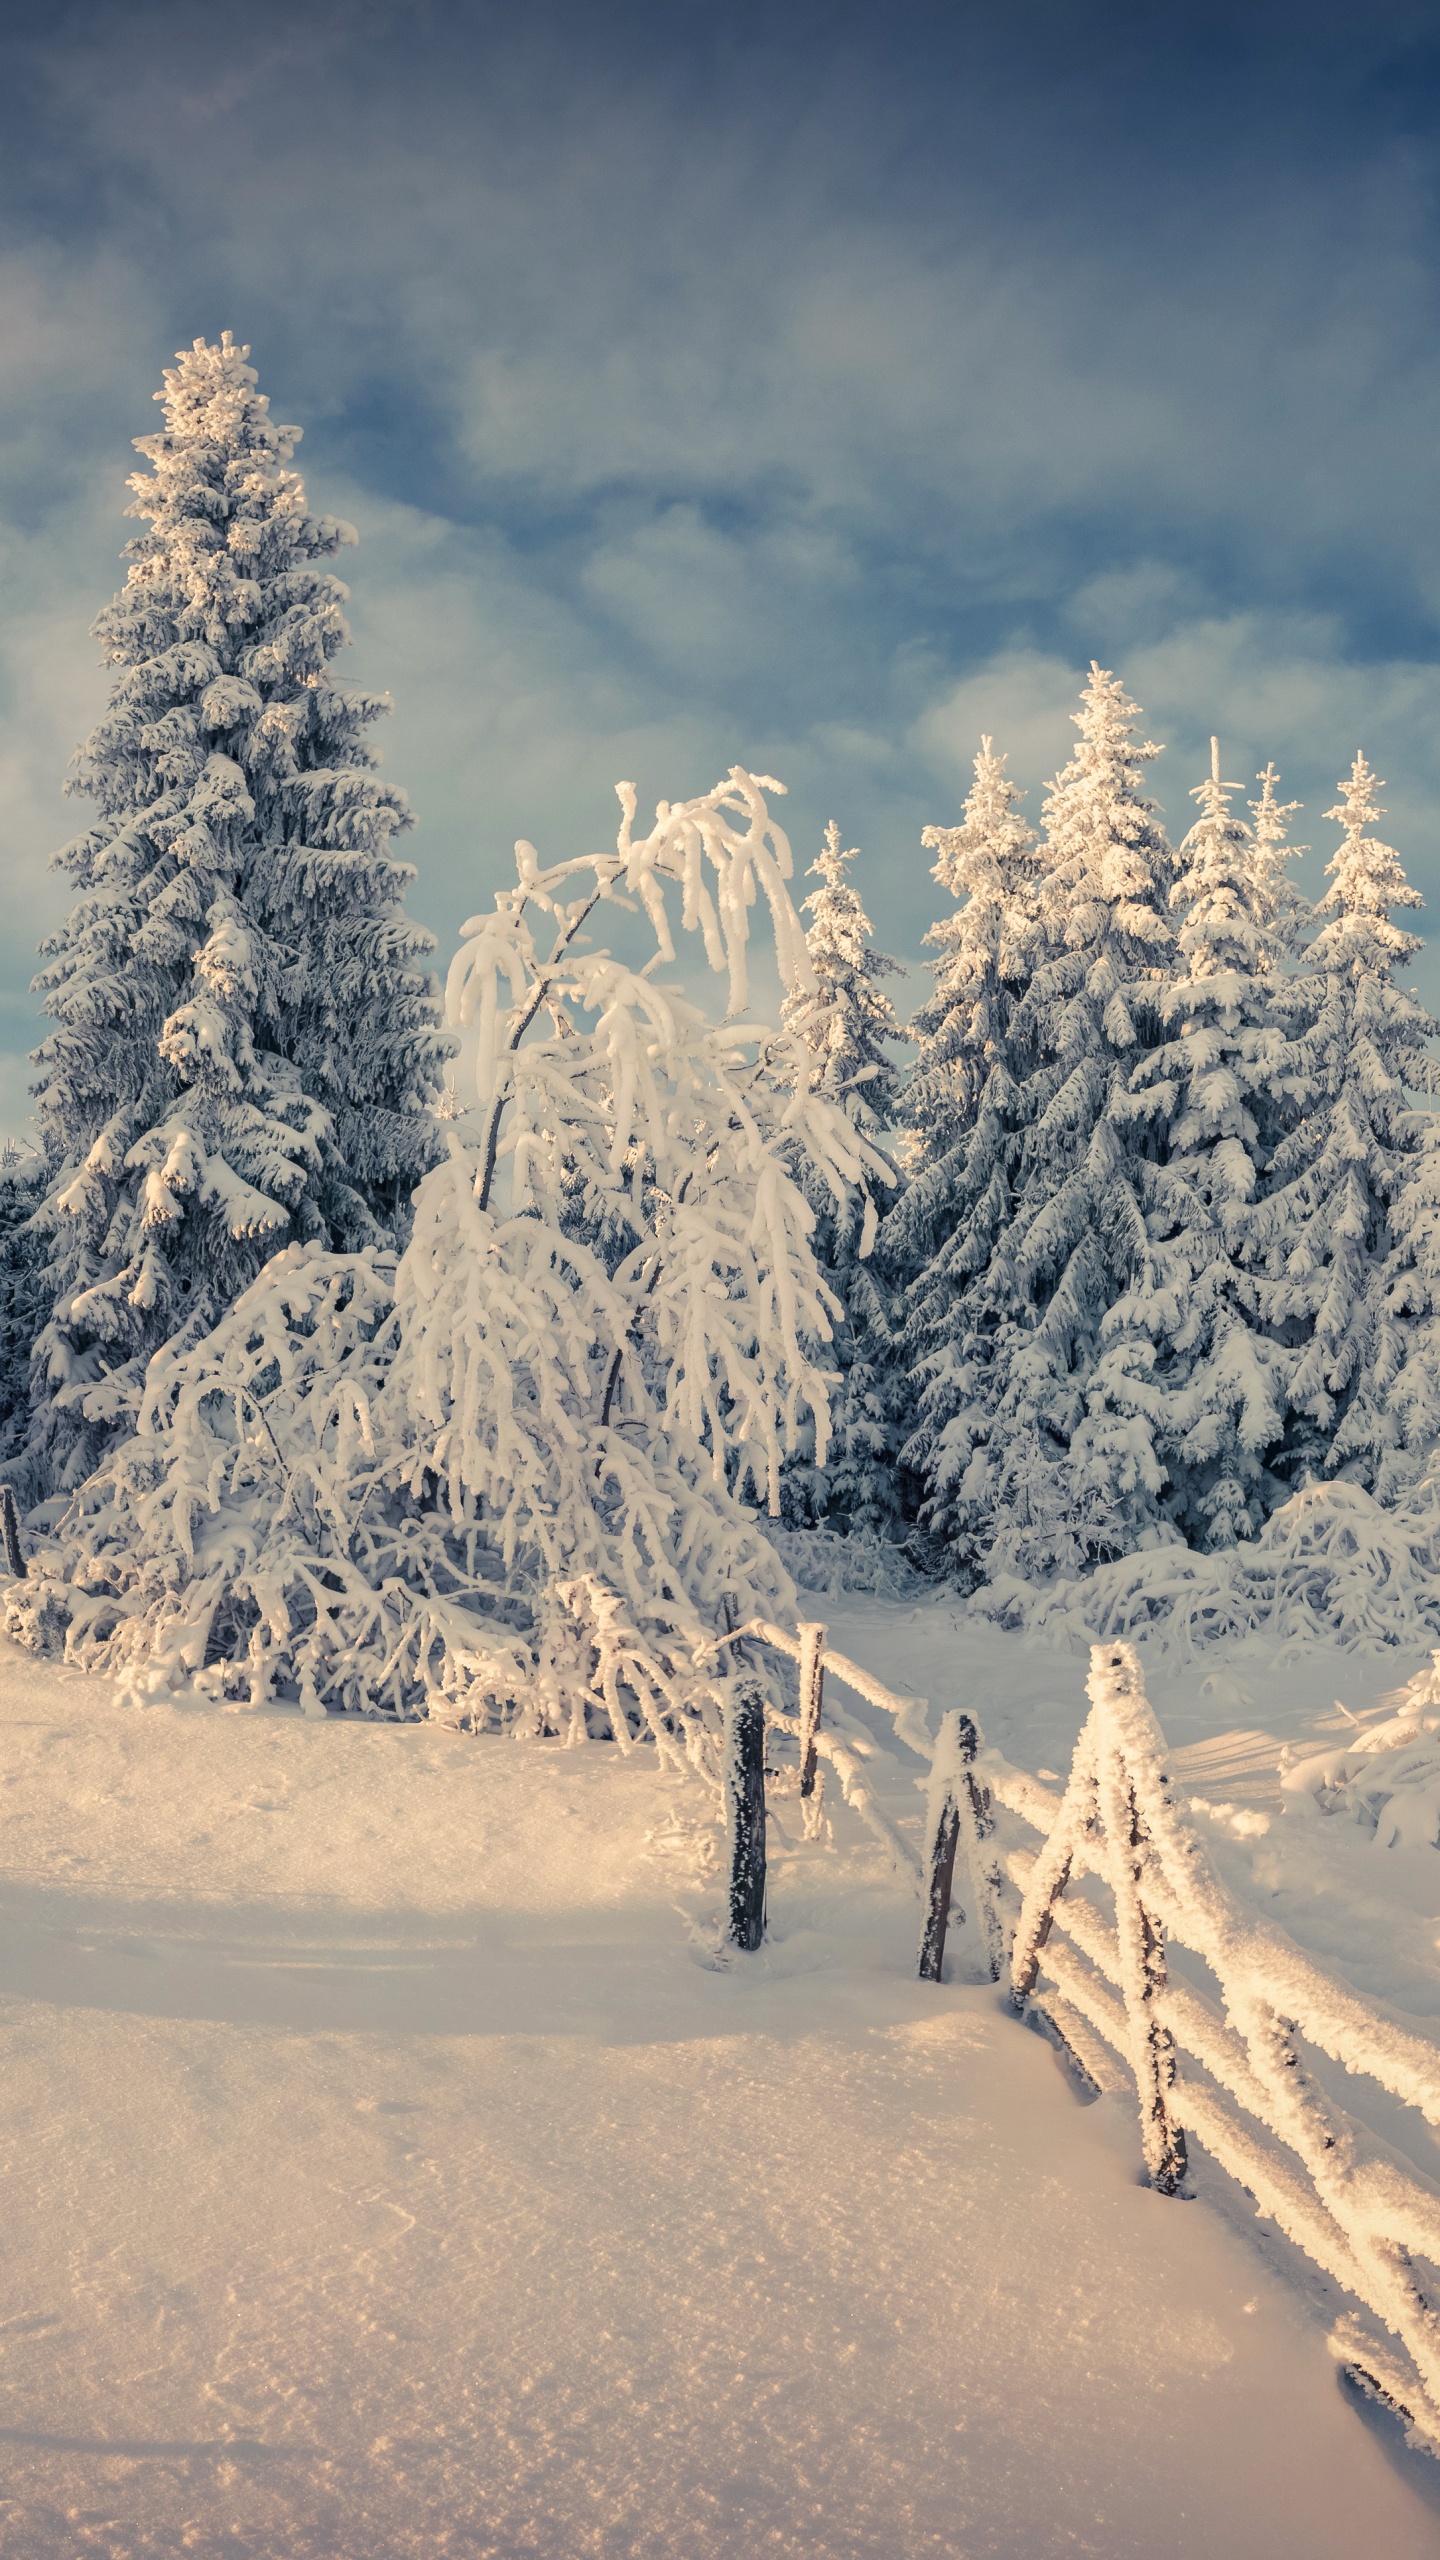 Snow Covered Trees and Mountains During Daytime. Wallpaper in 1440x2560 Resolution